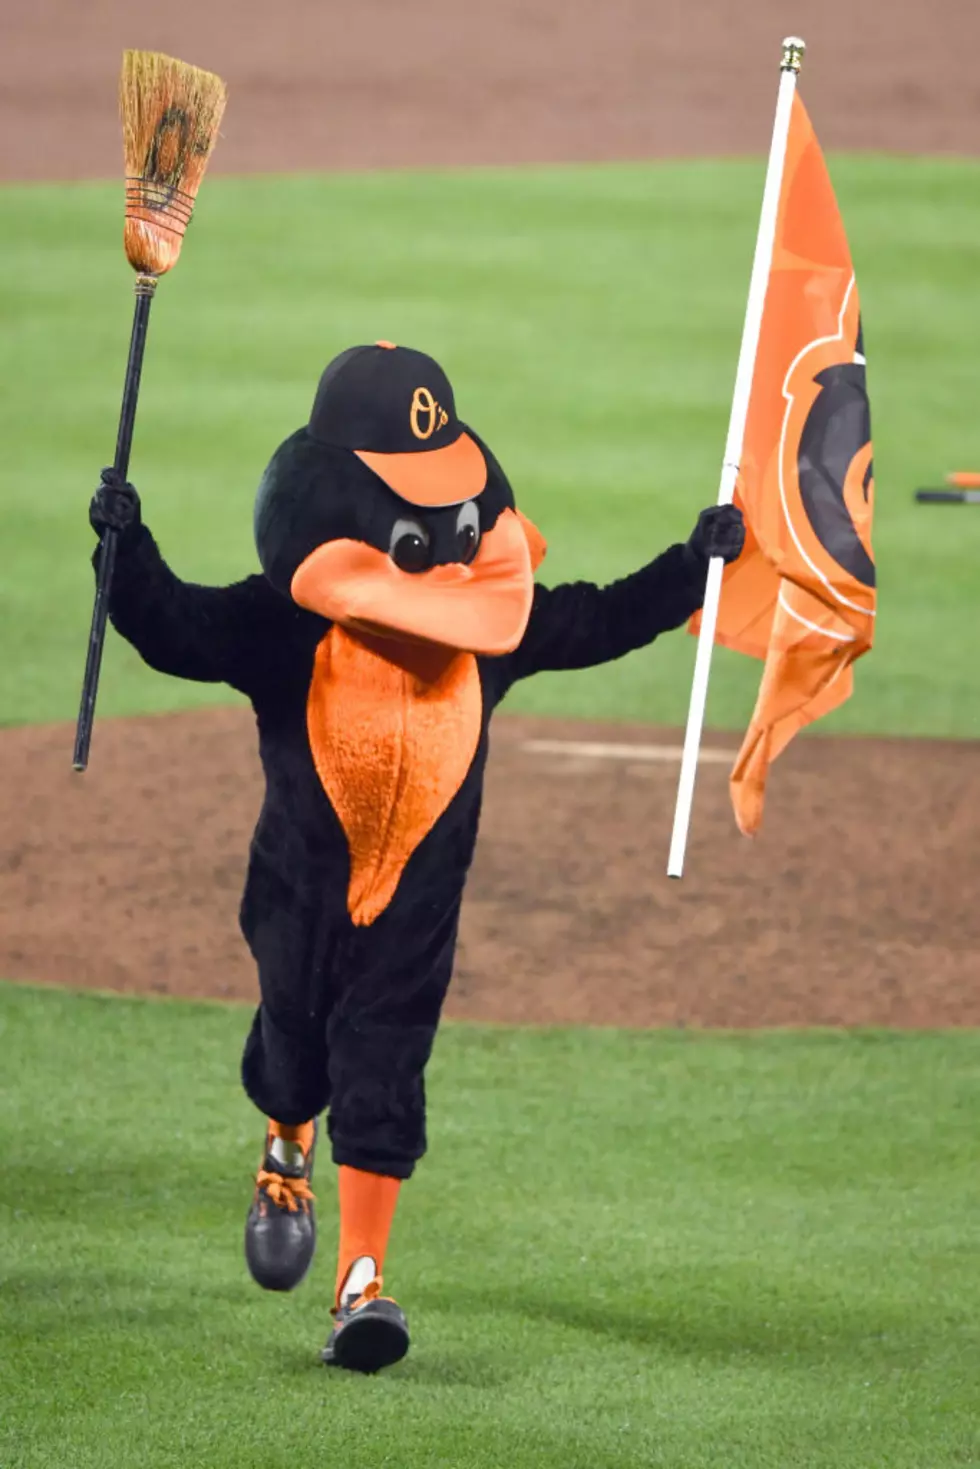 Today I Think Texas Needs to Learn About the Orioles Legendary Broom Girl